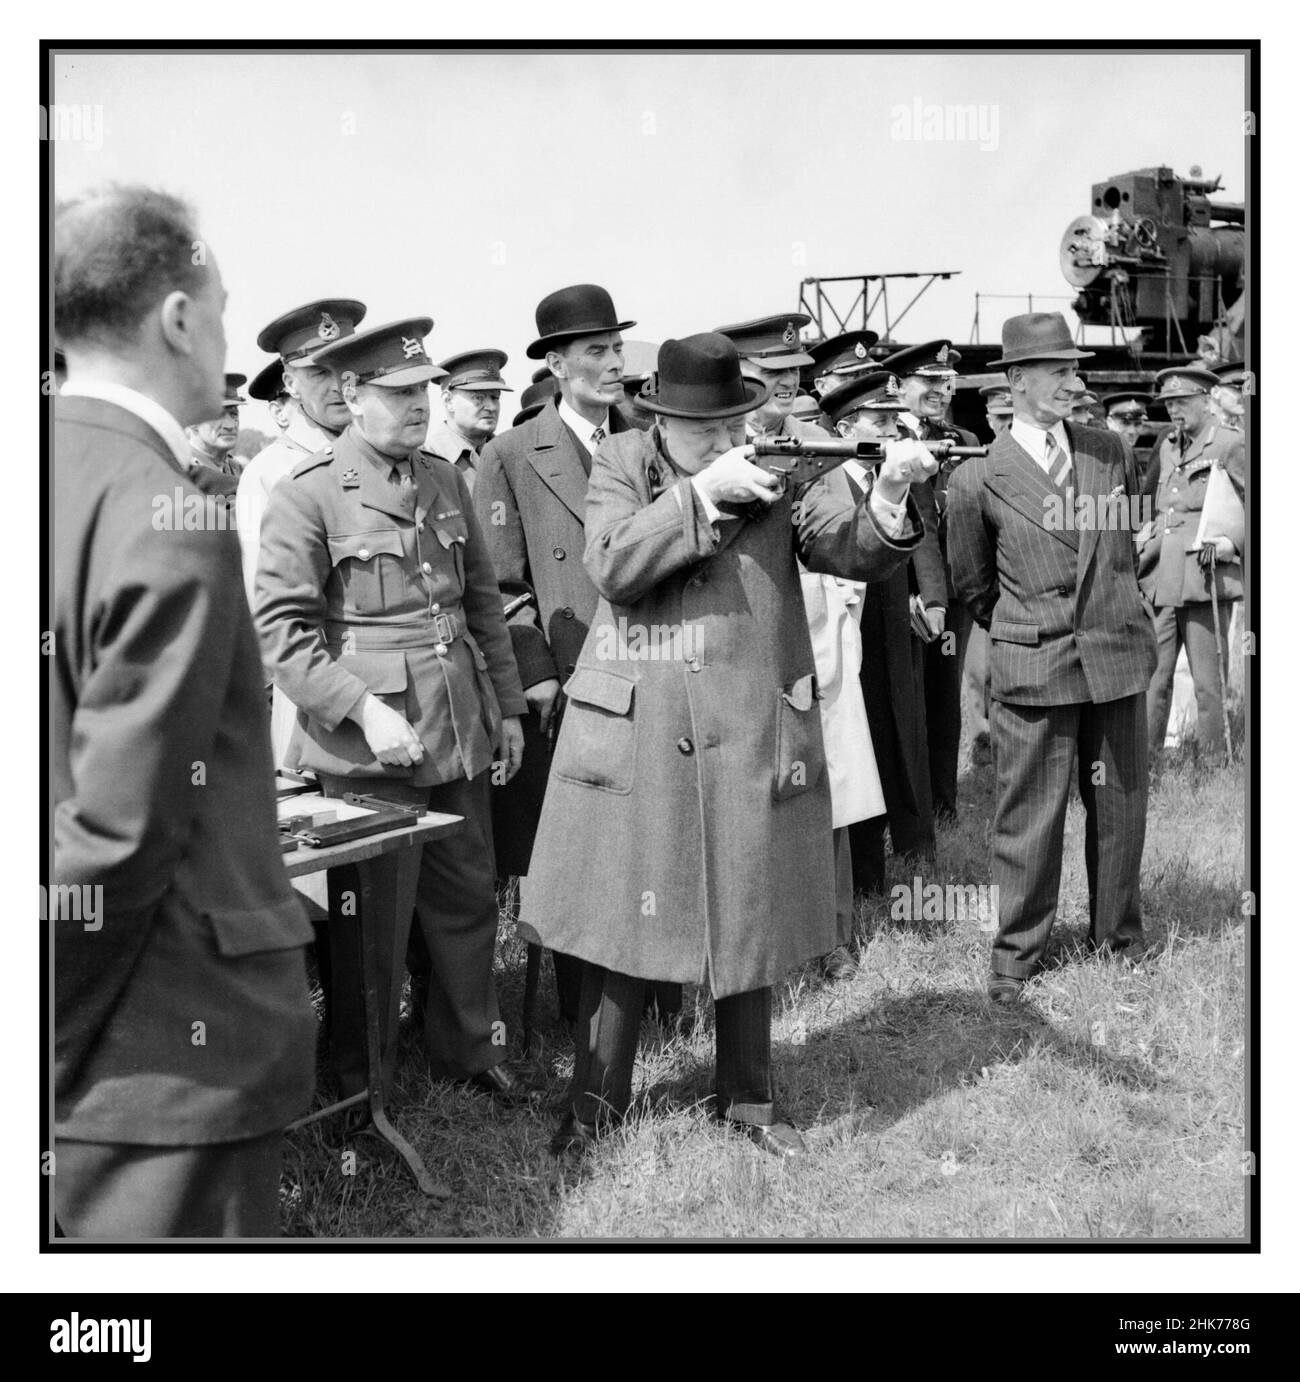 World War II Winston Churchill as Prime Minister 1940-45 Winston Churchill takes aim with a Sten gun during a visit to the Royal Artillery experimental station at Shoeburyness in Essex, 13 June 1941. Stock Photo